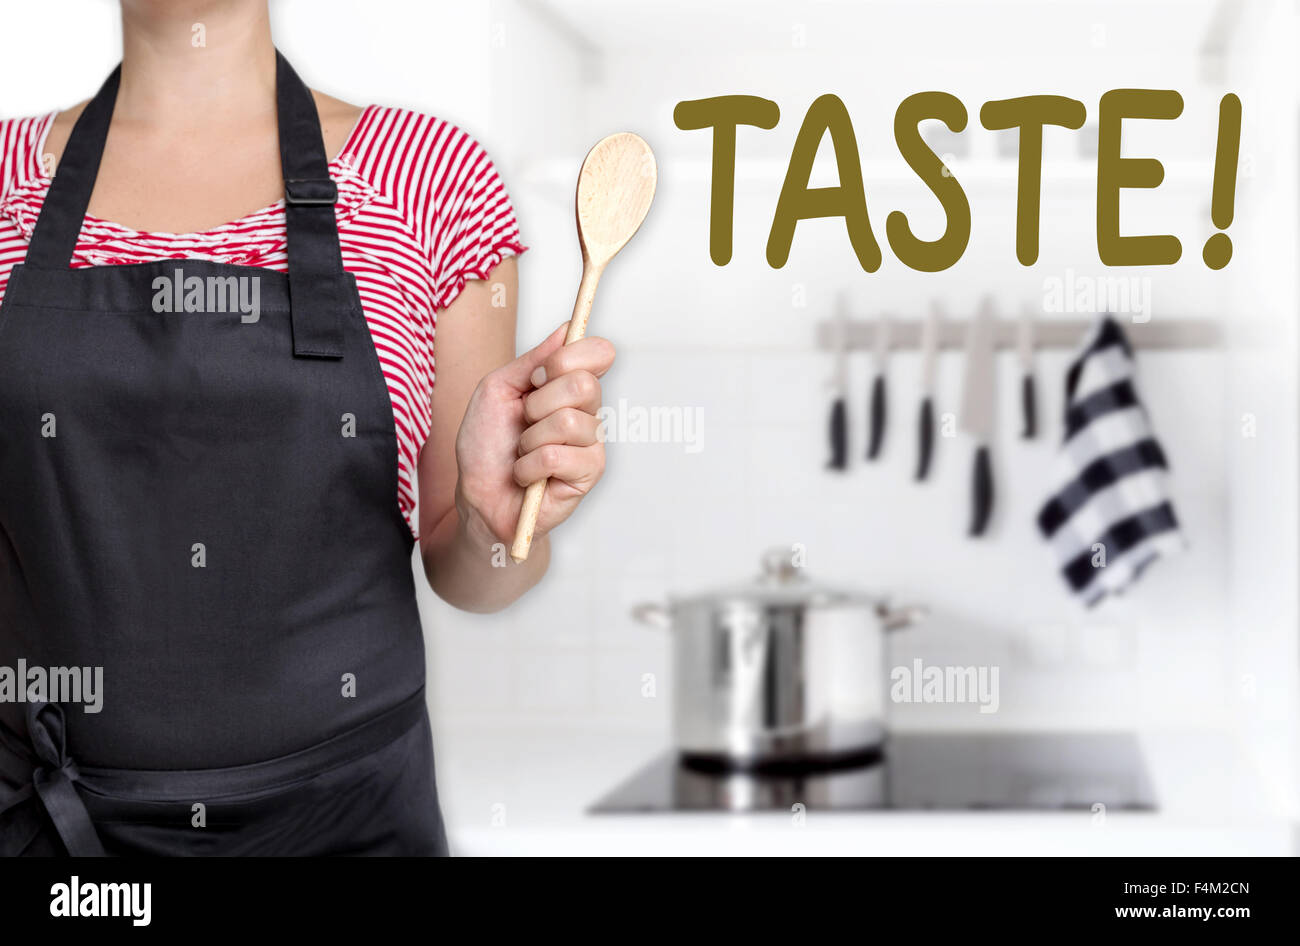 taste cook holding wooden spoon background concept. Stock Photo